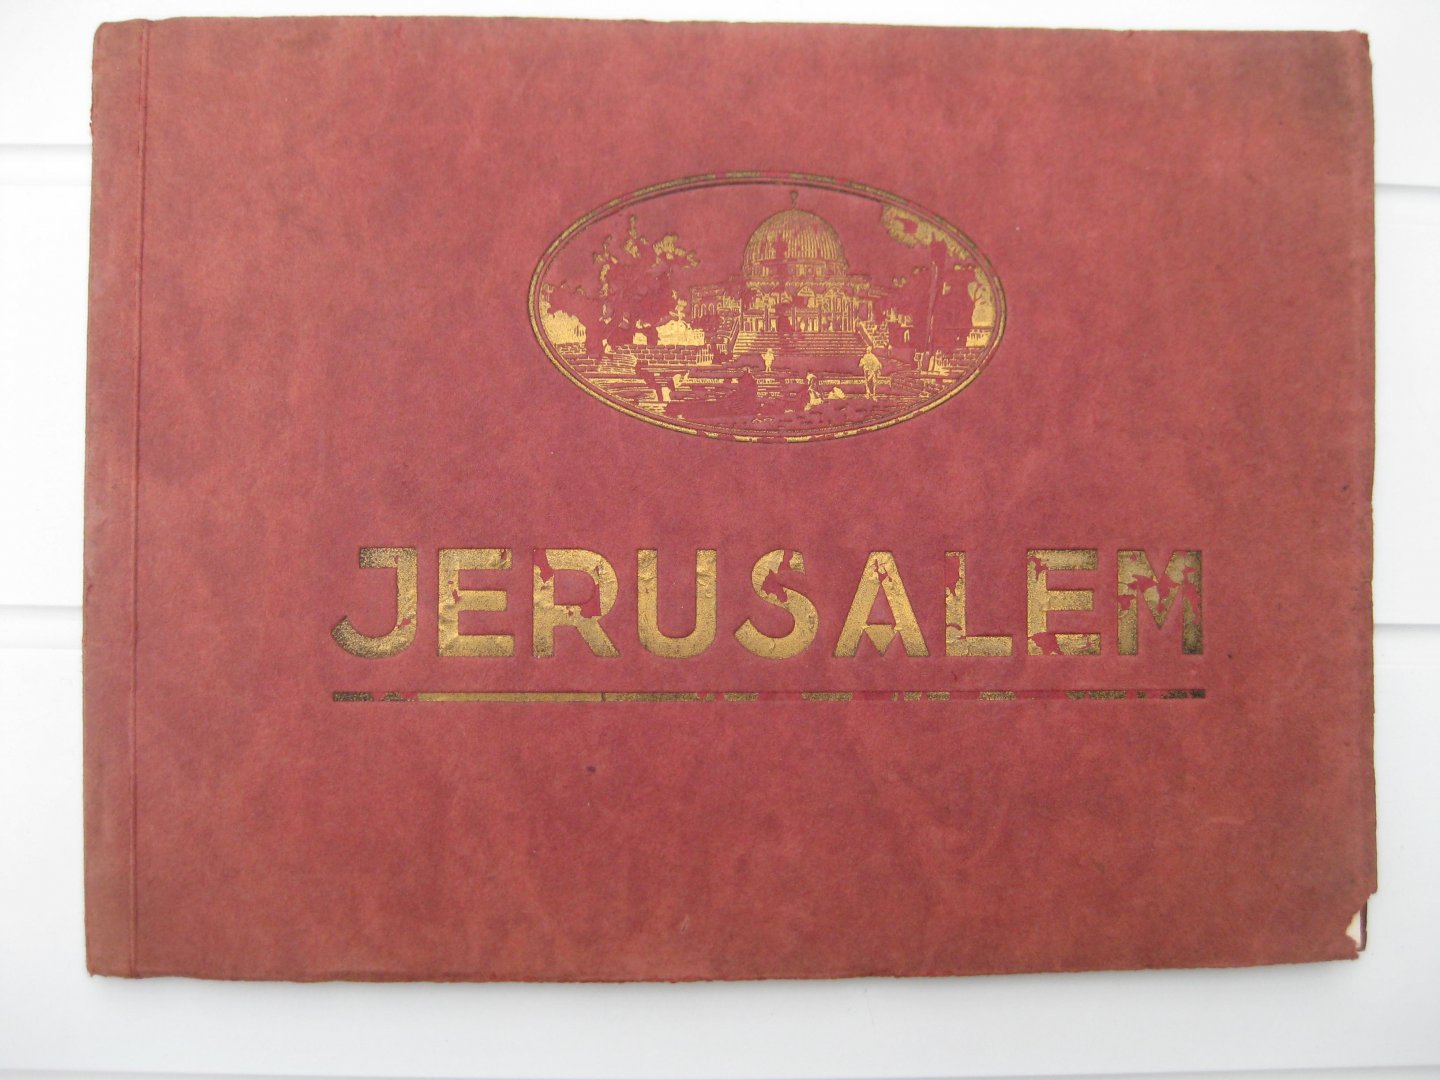  - In the Holy Land. Jerusalem -Bethlehem and Environs. 36 Artistic Views.